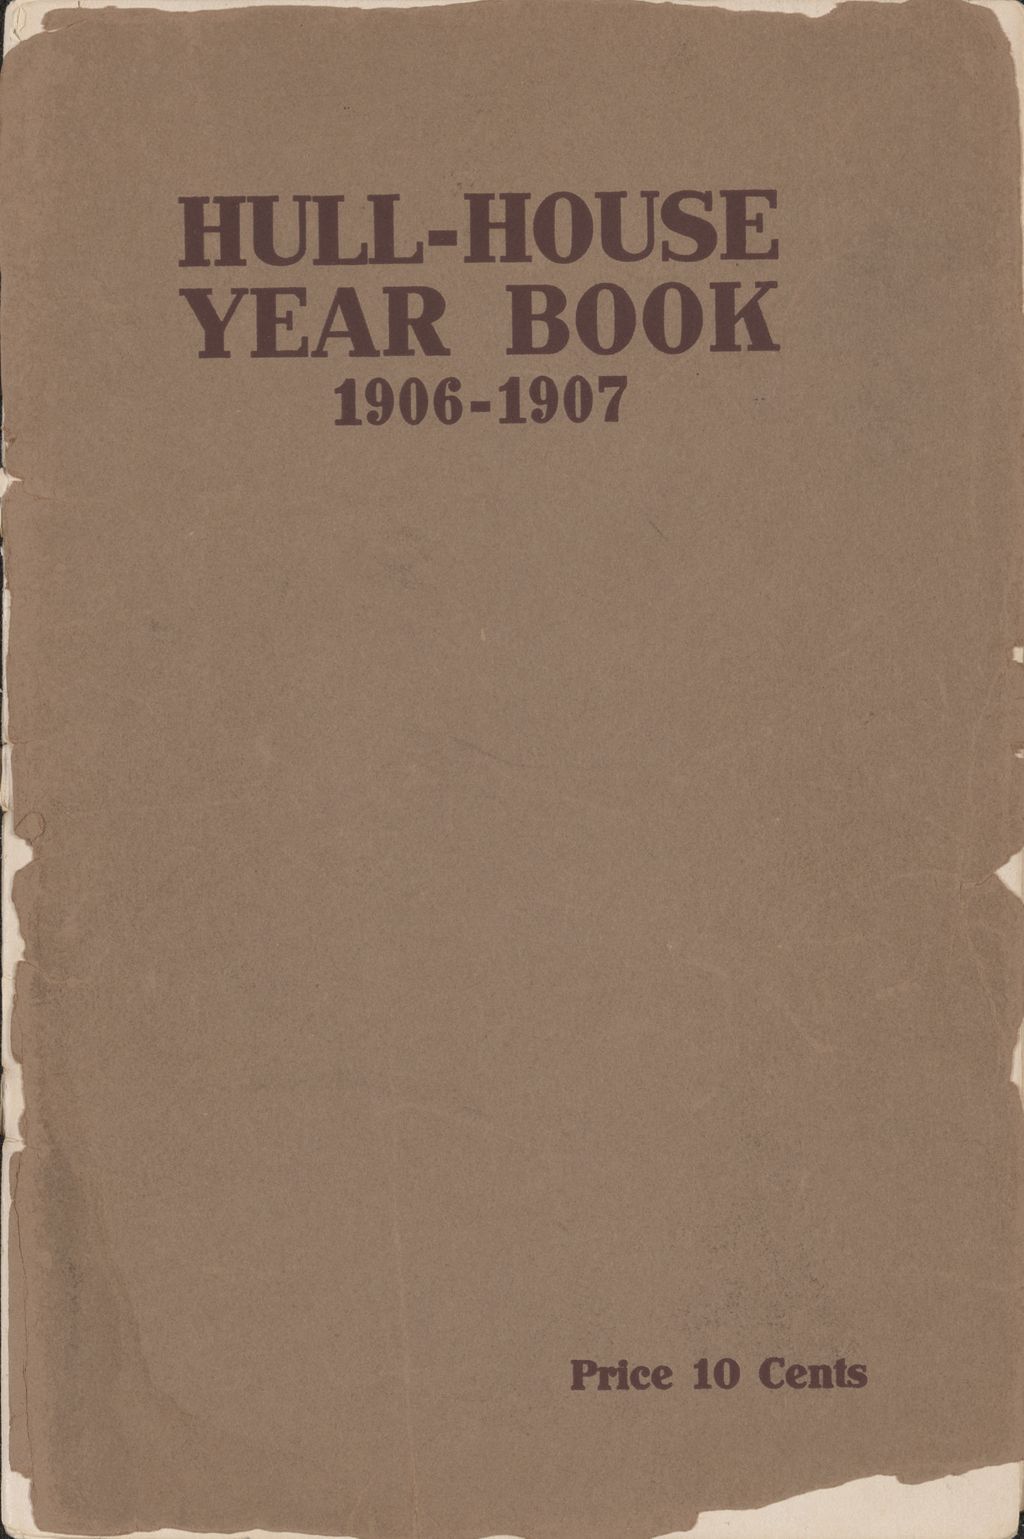 Miniature of Hull-House Year Book, 1906-1907